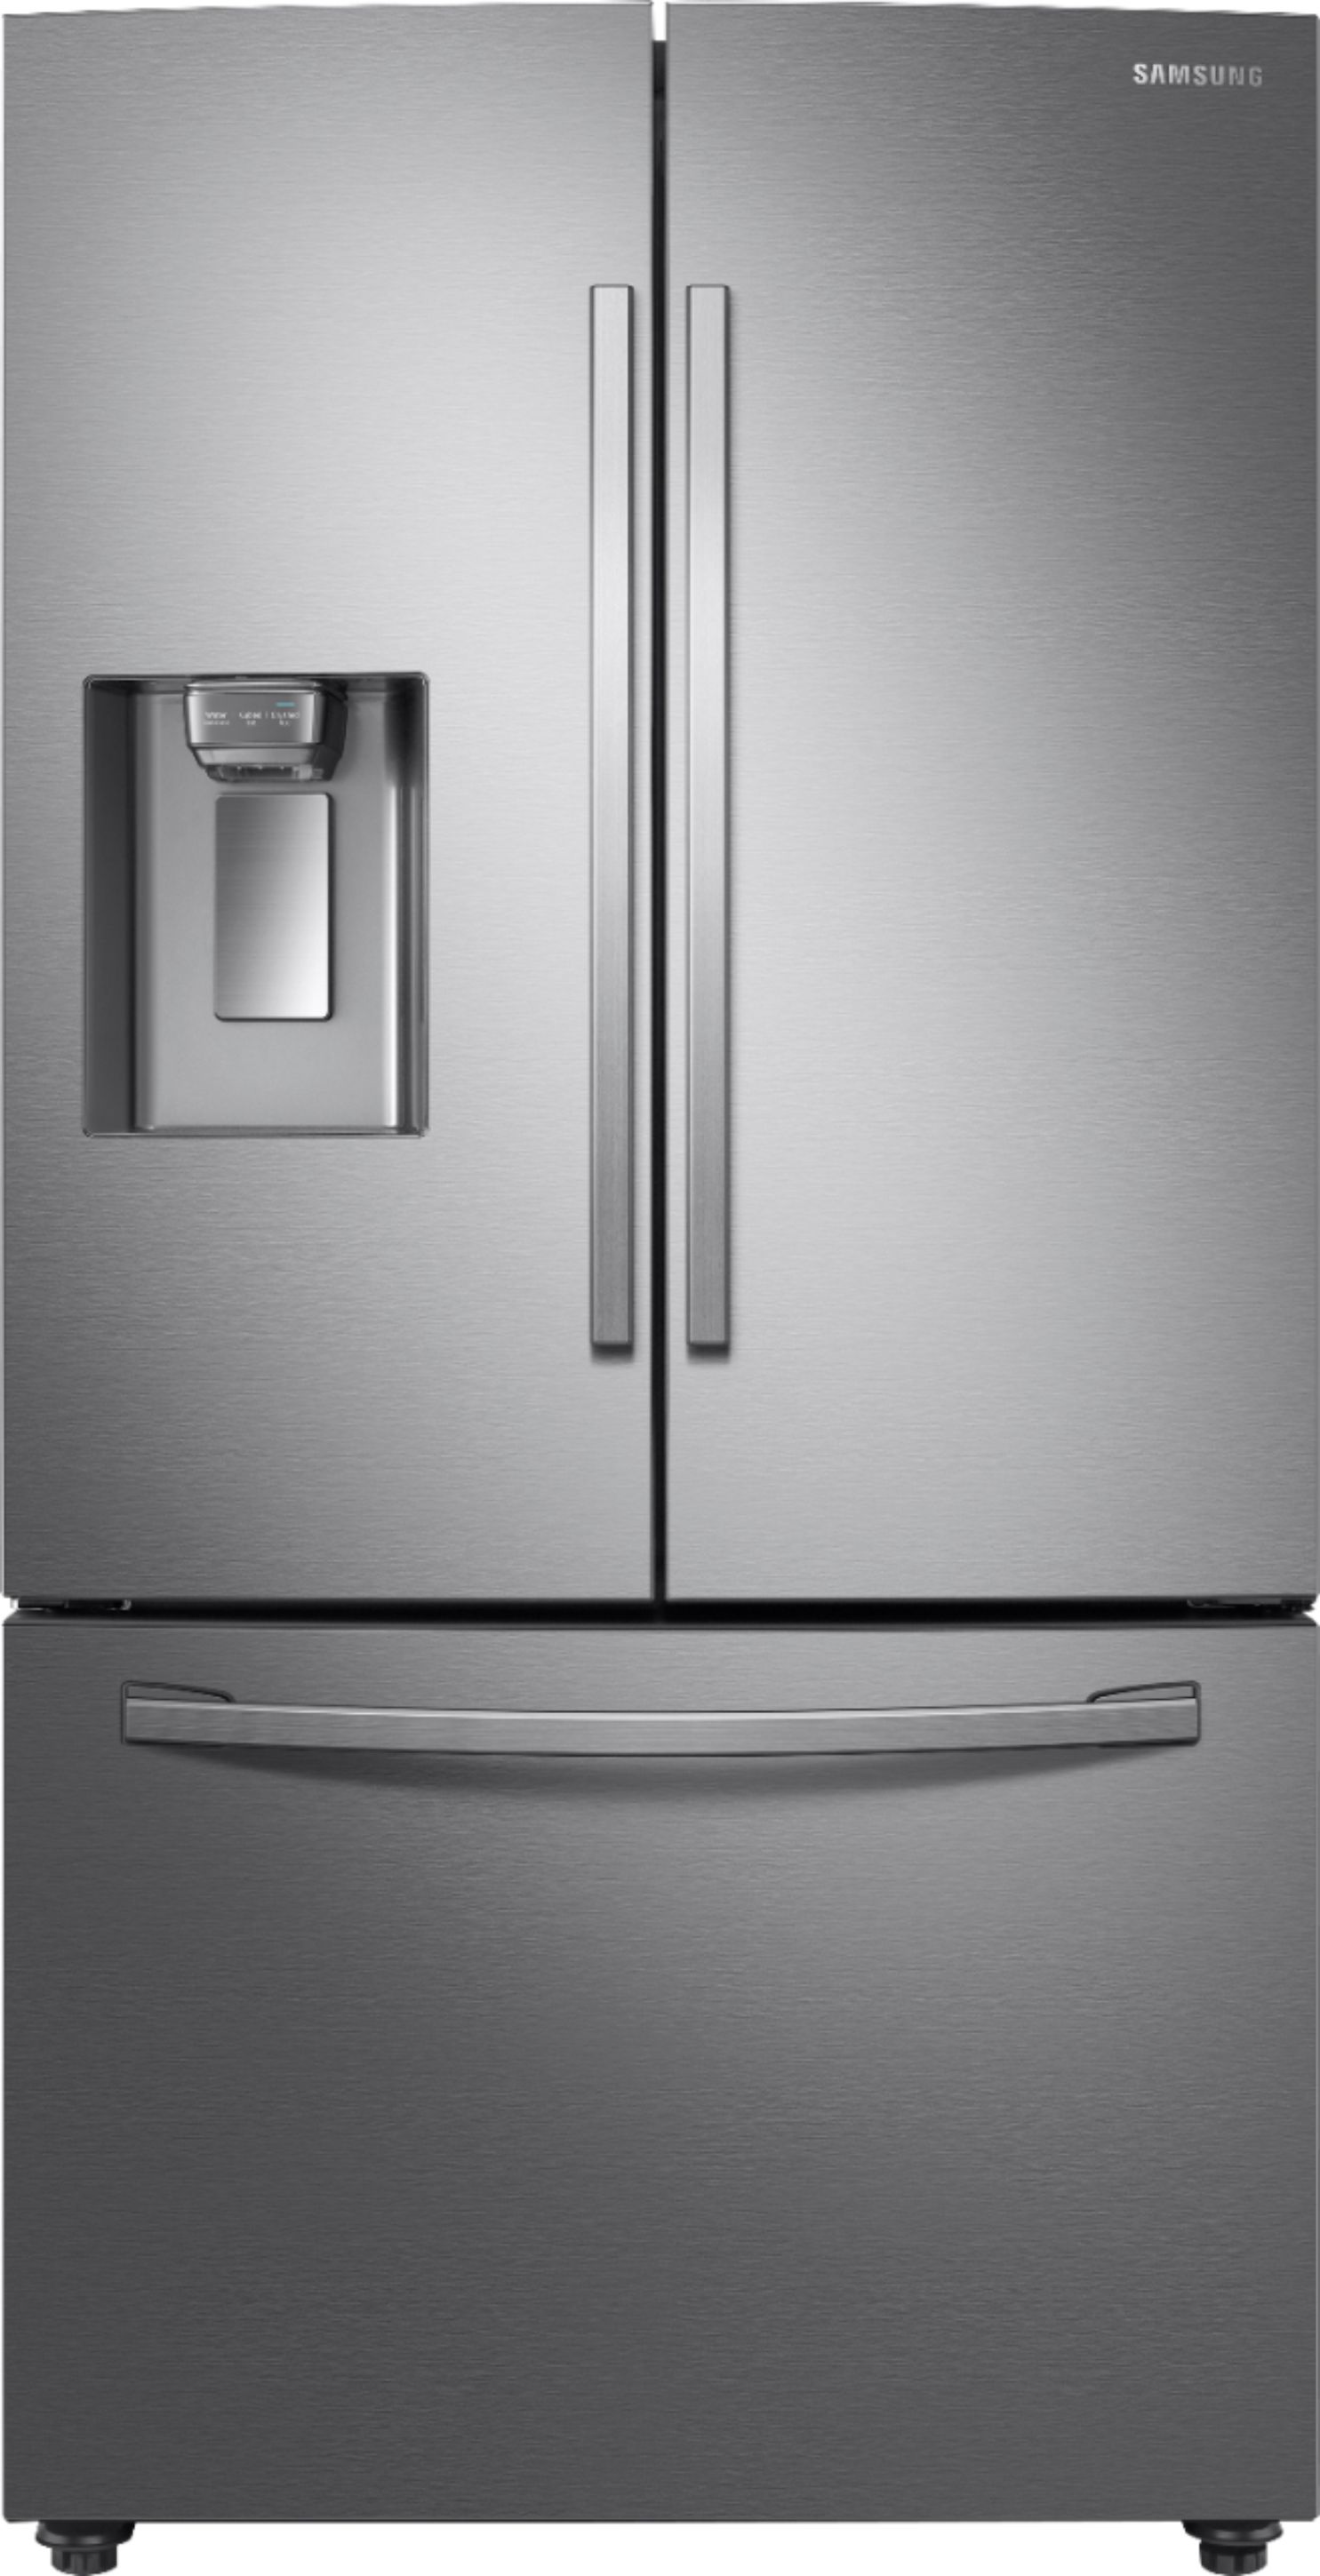 Samsung - 28 Cu. Ft. French Door Refrigerator with CoolSelect Pantry - Stainless steel